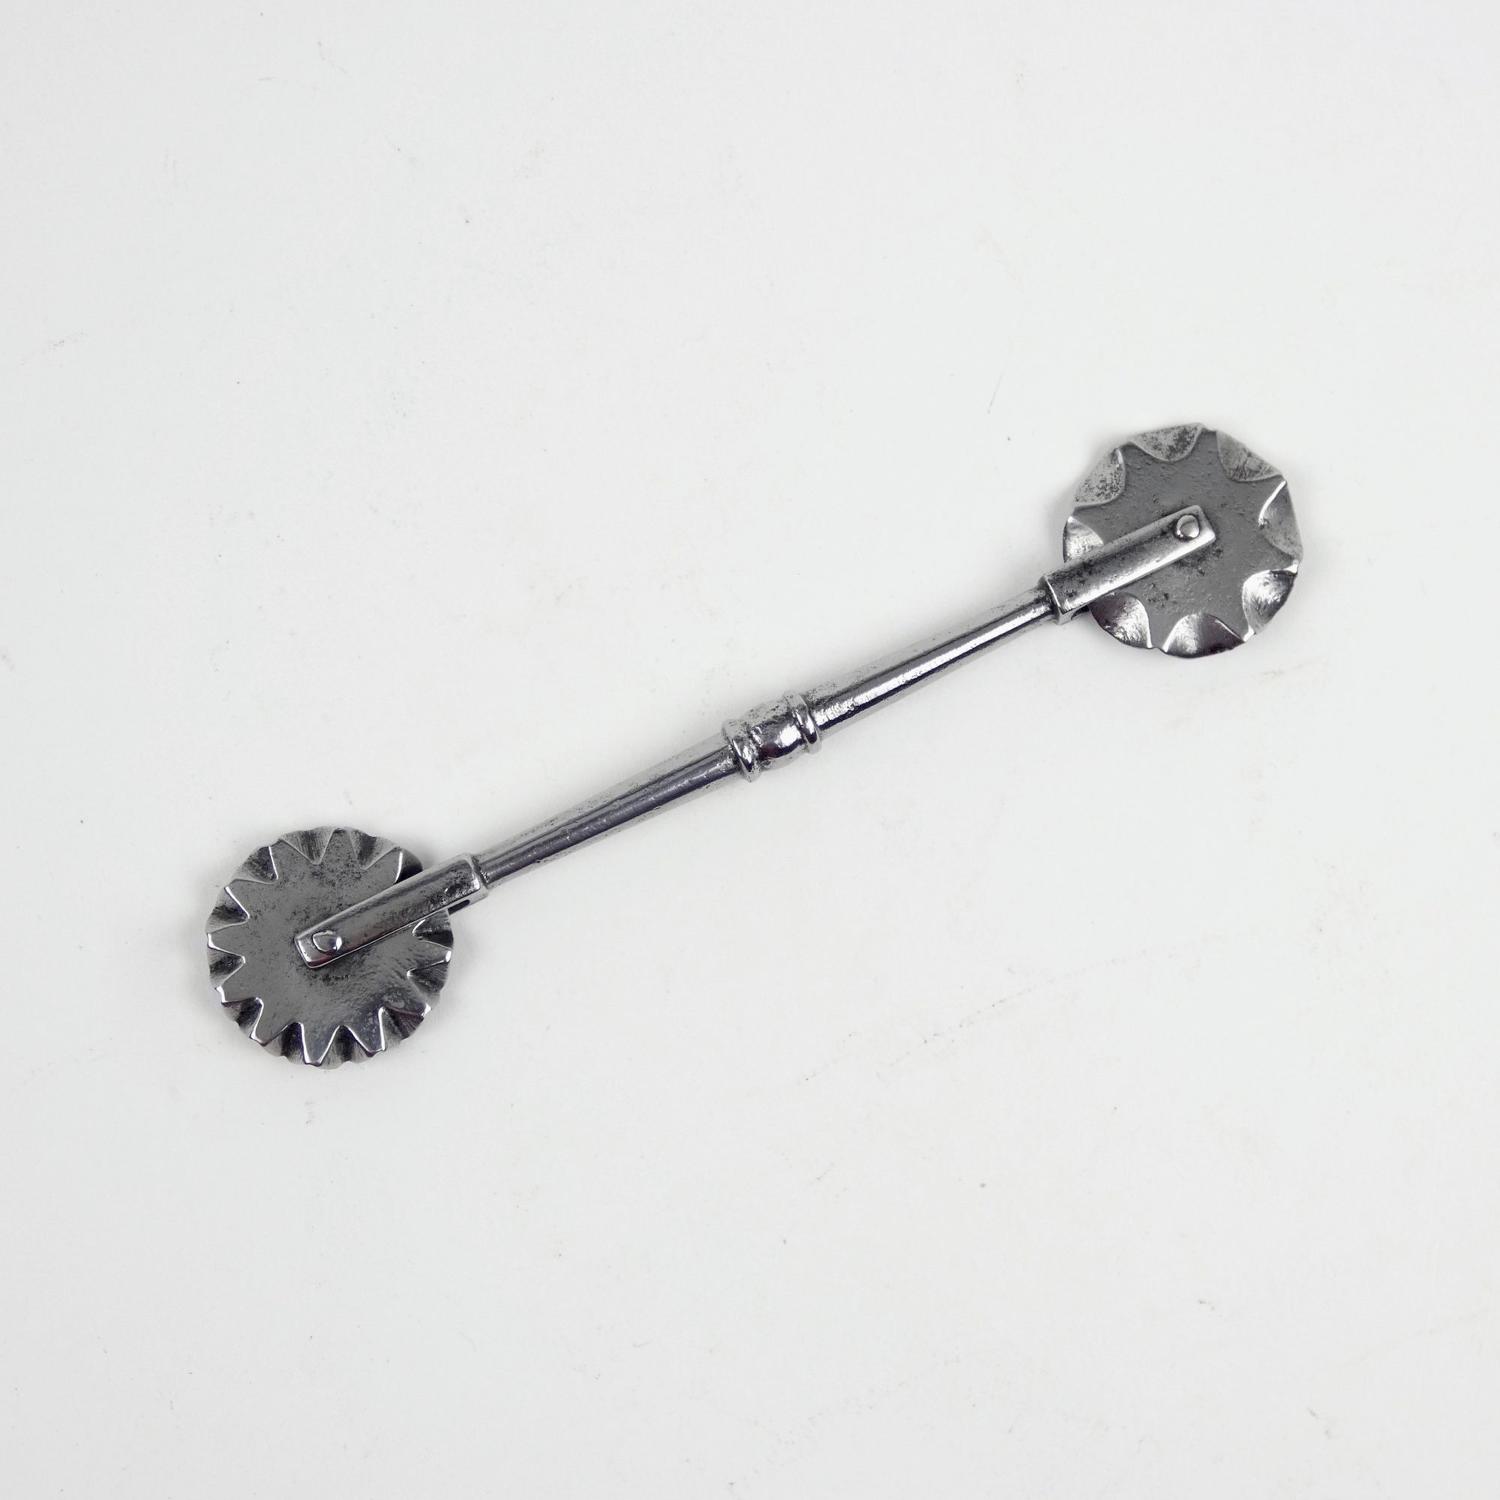 Early, steel pastry tool